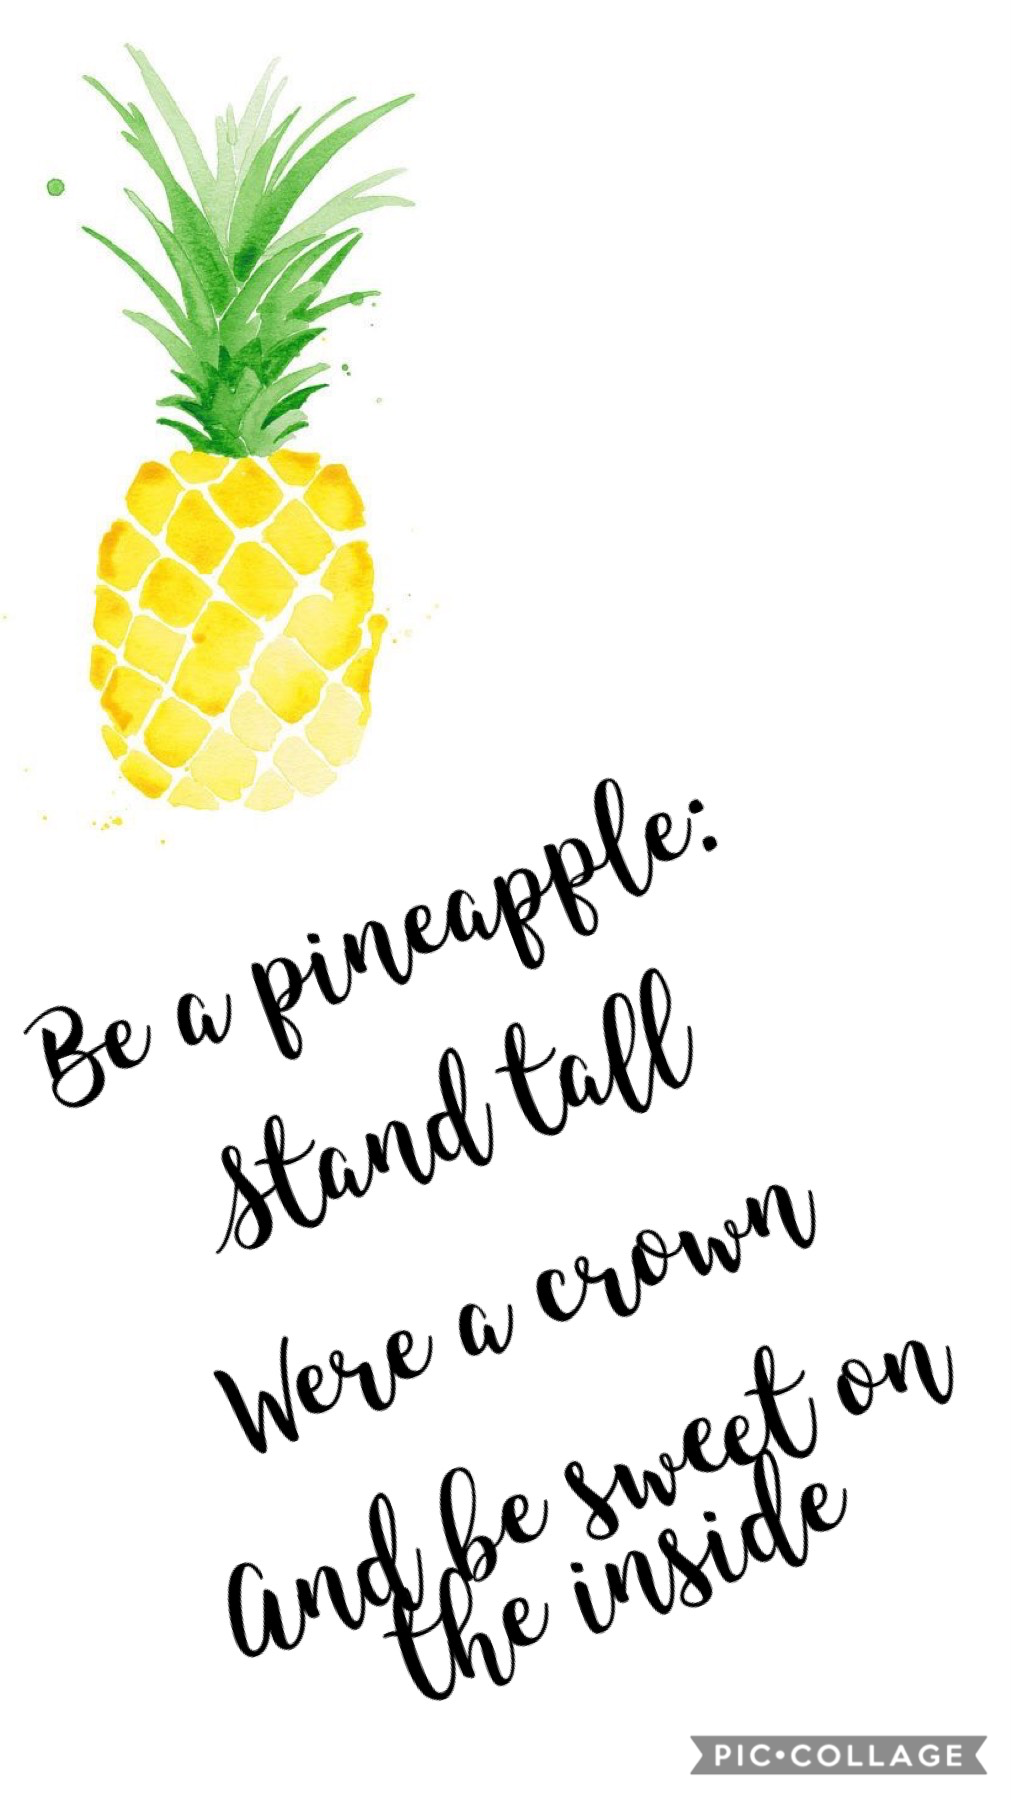 Be a pineapple: Stand tall, Were a crown, And be sweet on the inside.